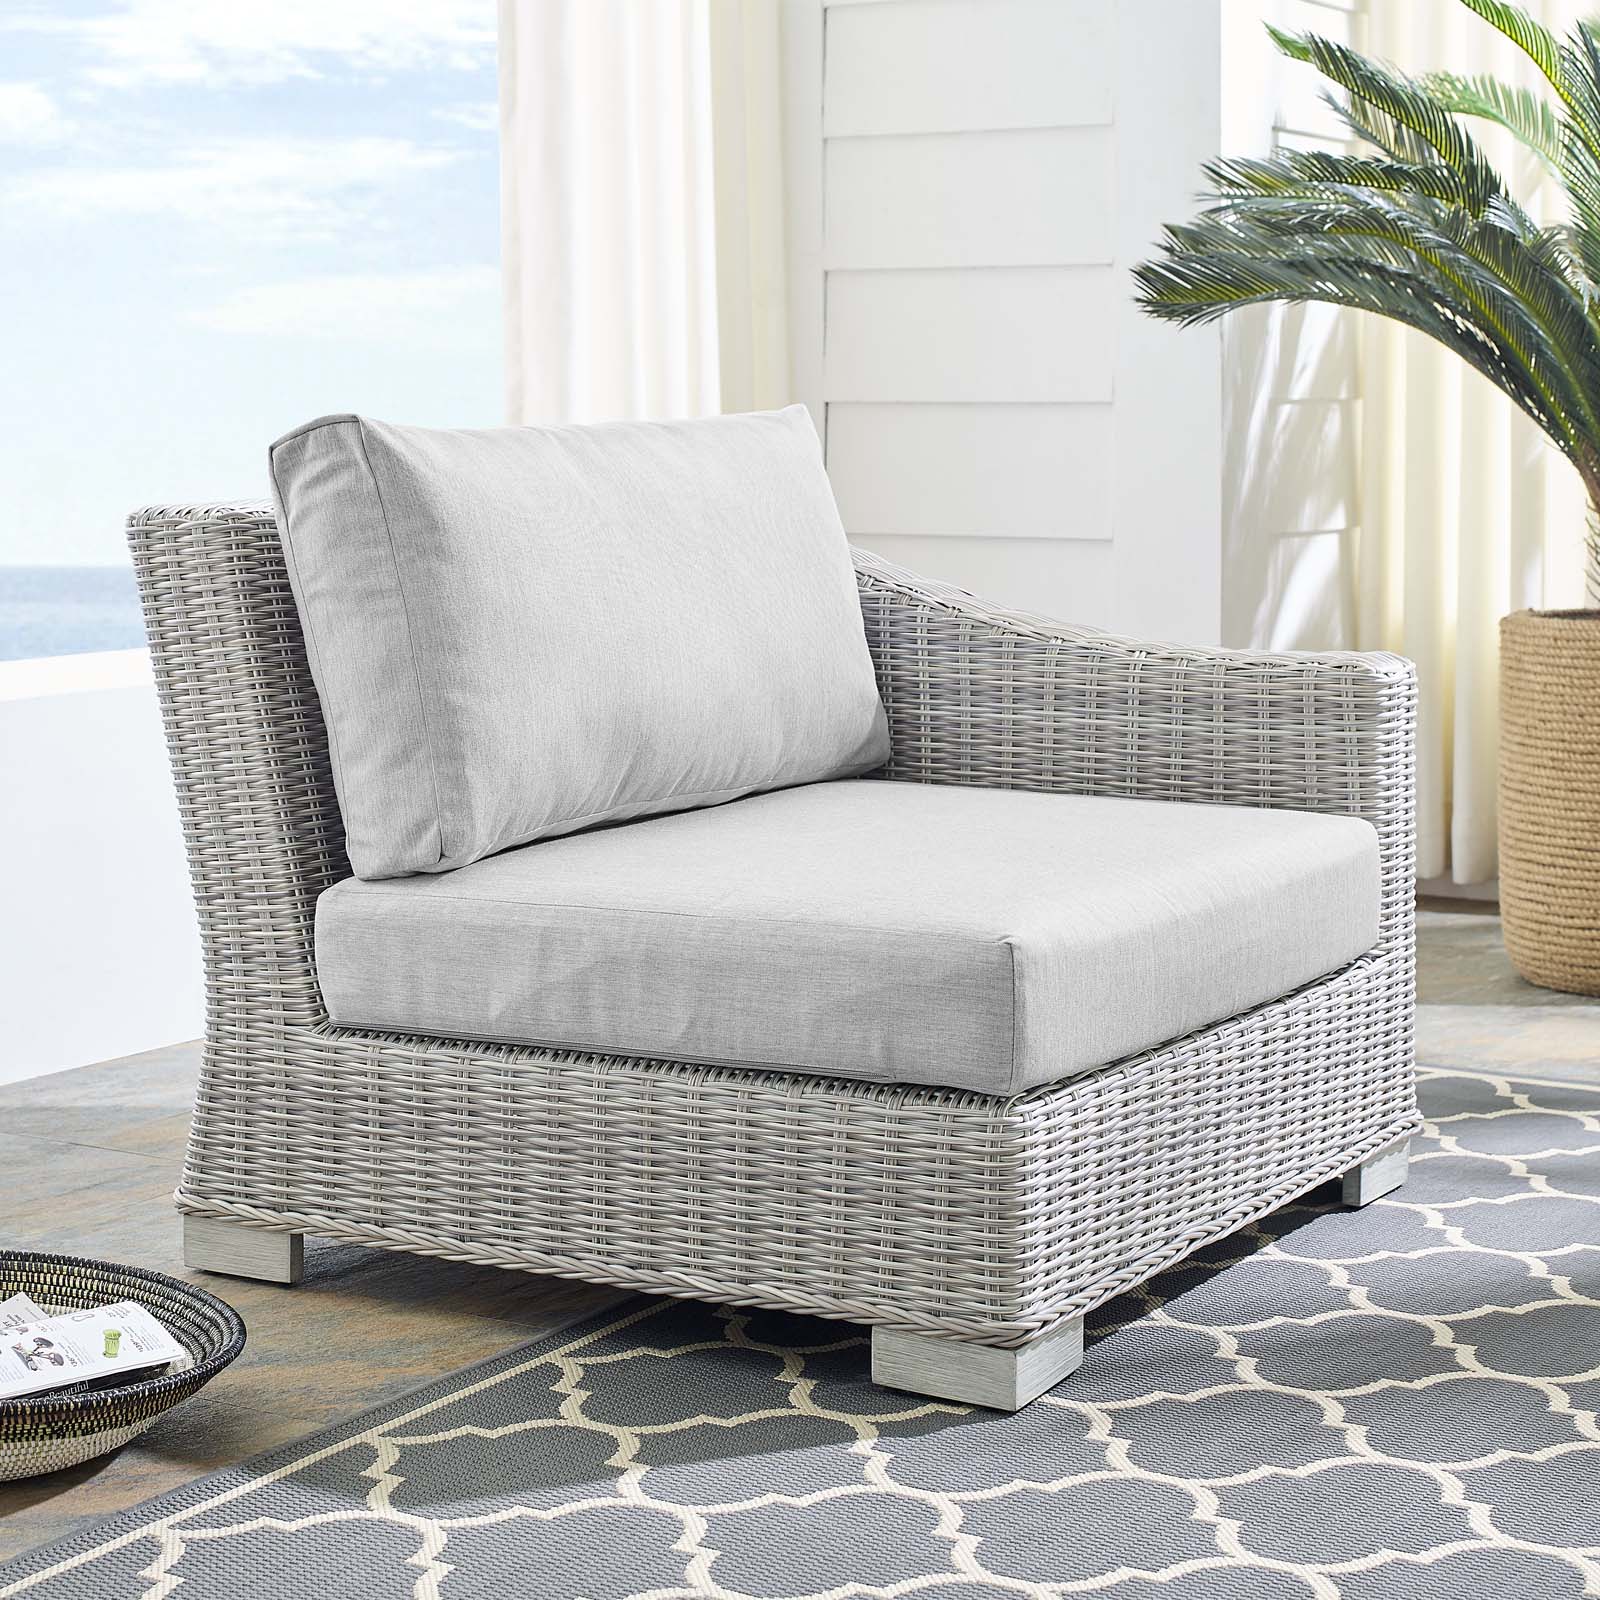 Modway Conway Sunbrella® Outdoor Patio Wicker Rattan Right-Arm Chair in Light Gray Gray - image 1 of 9